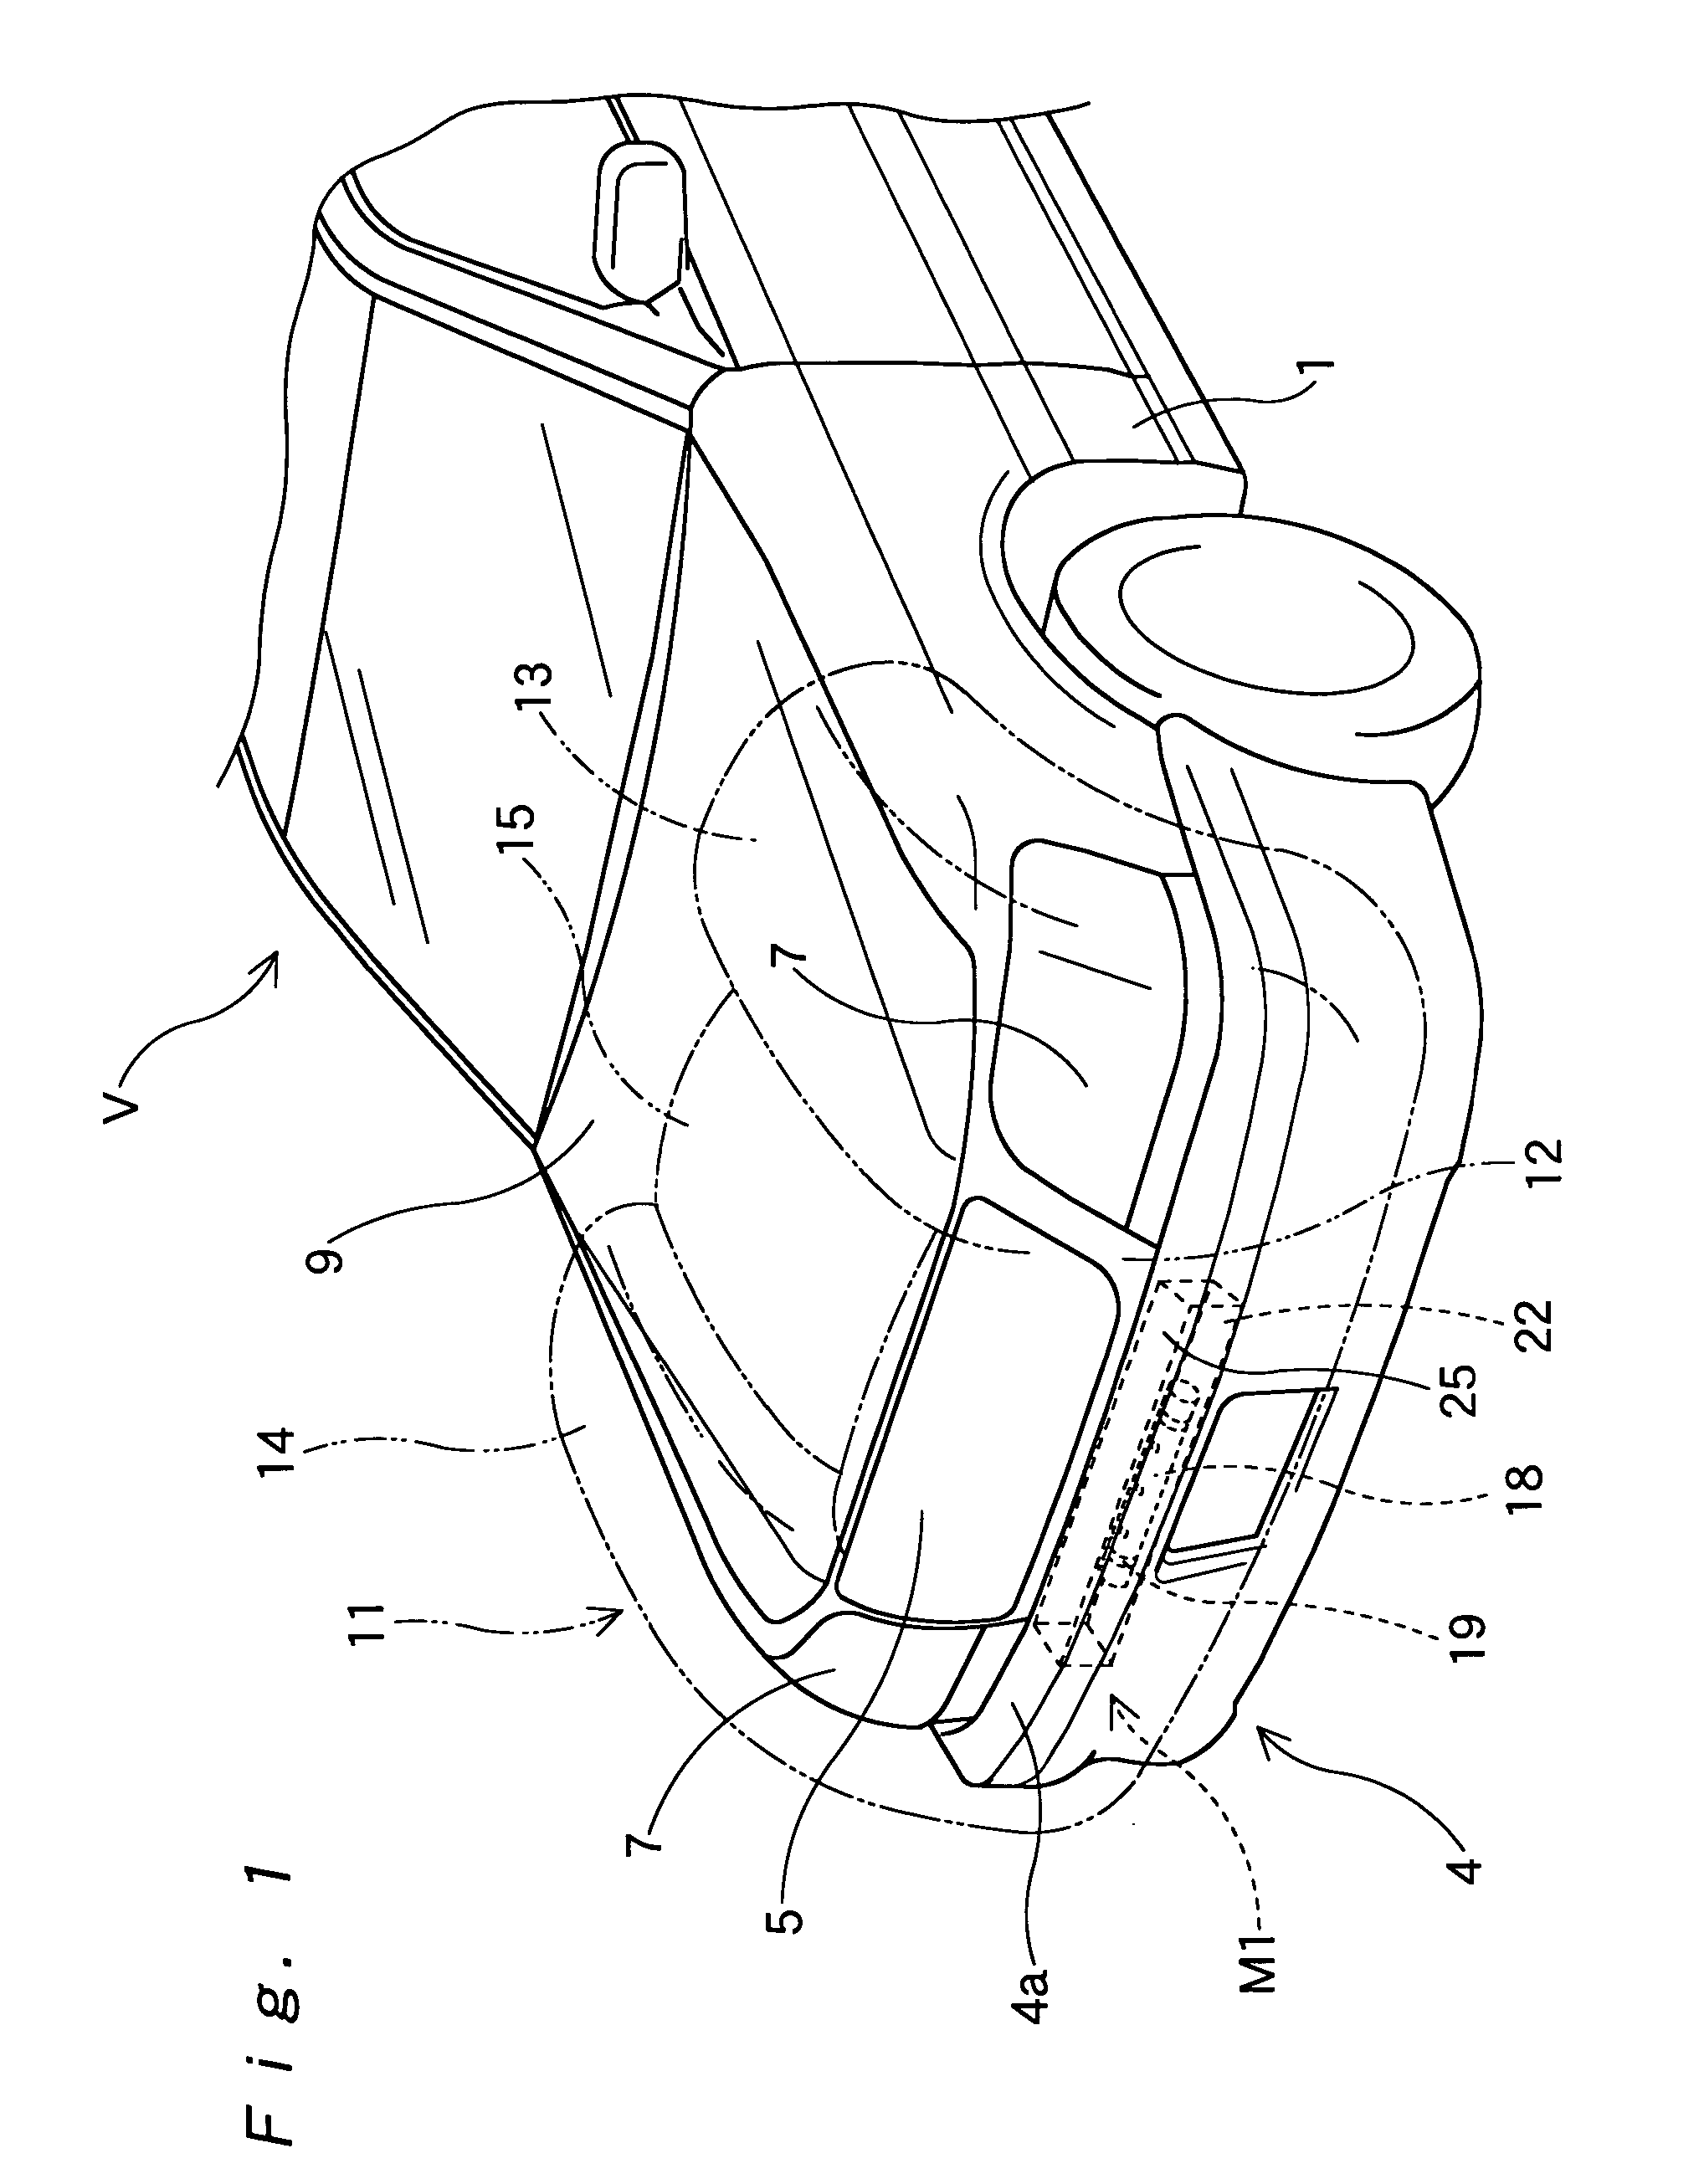 Airbag device for pedestrian protection